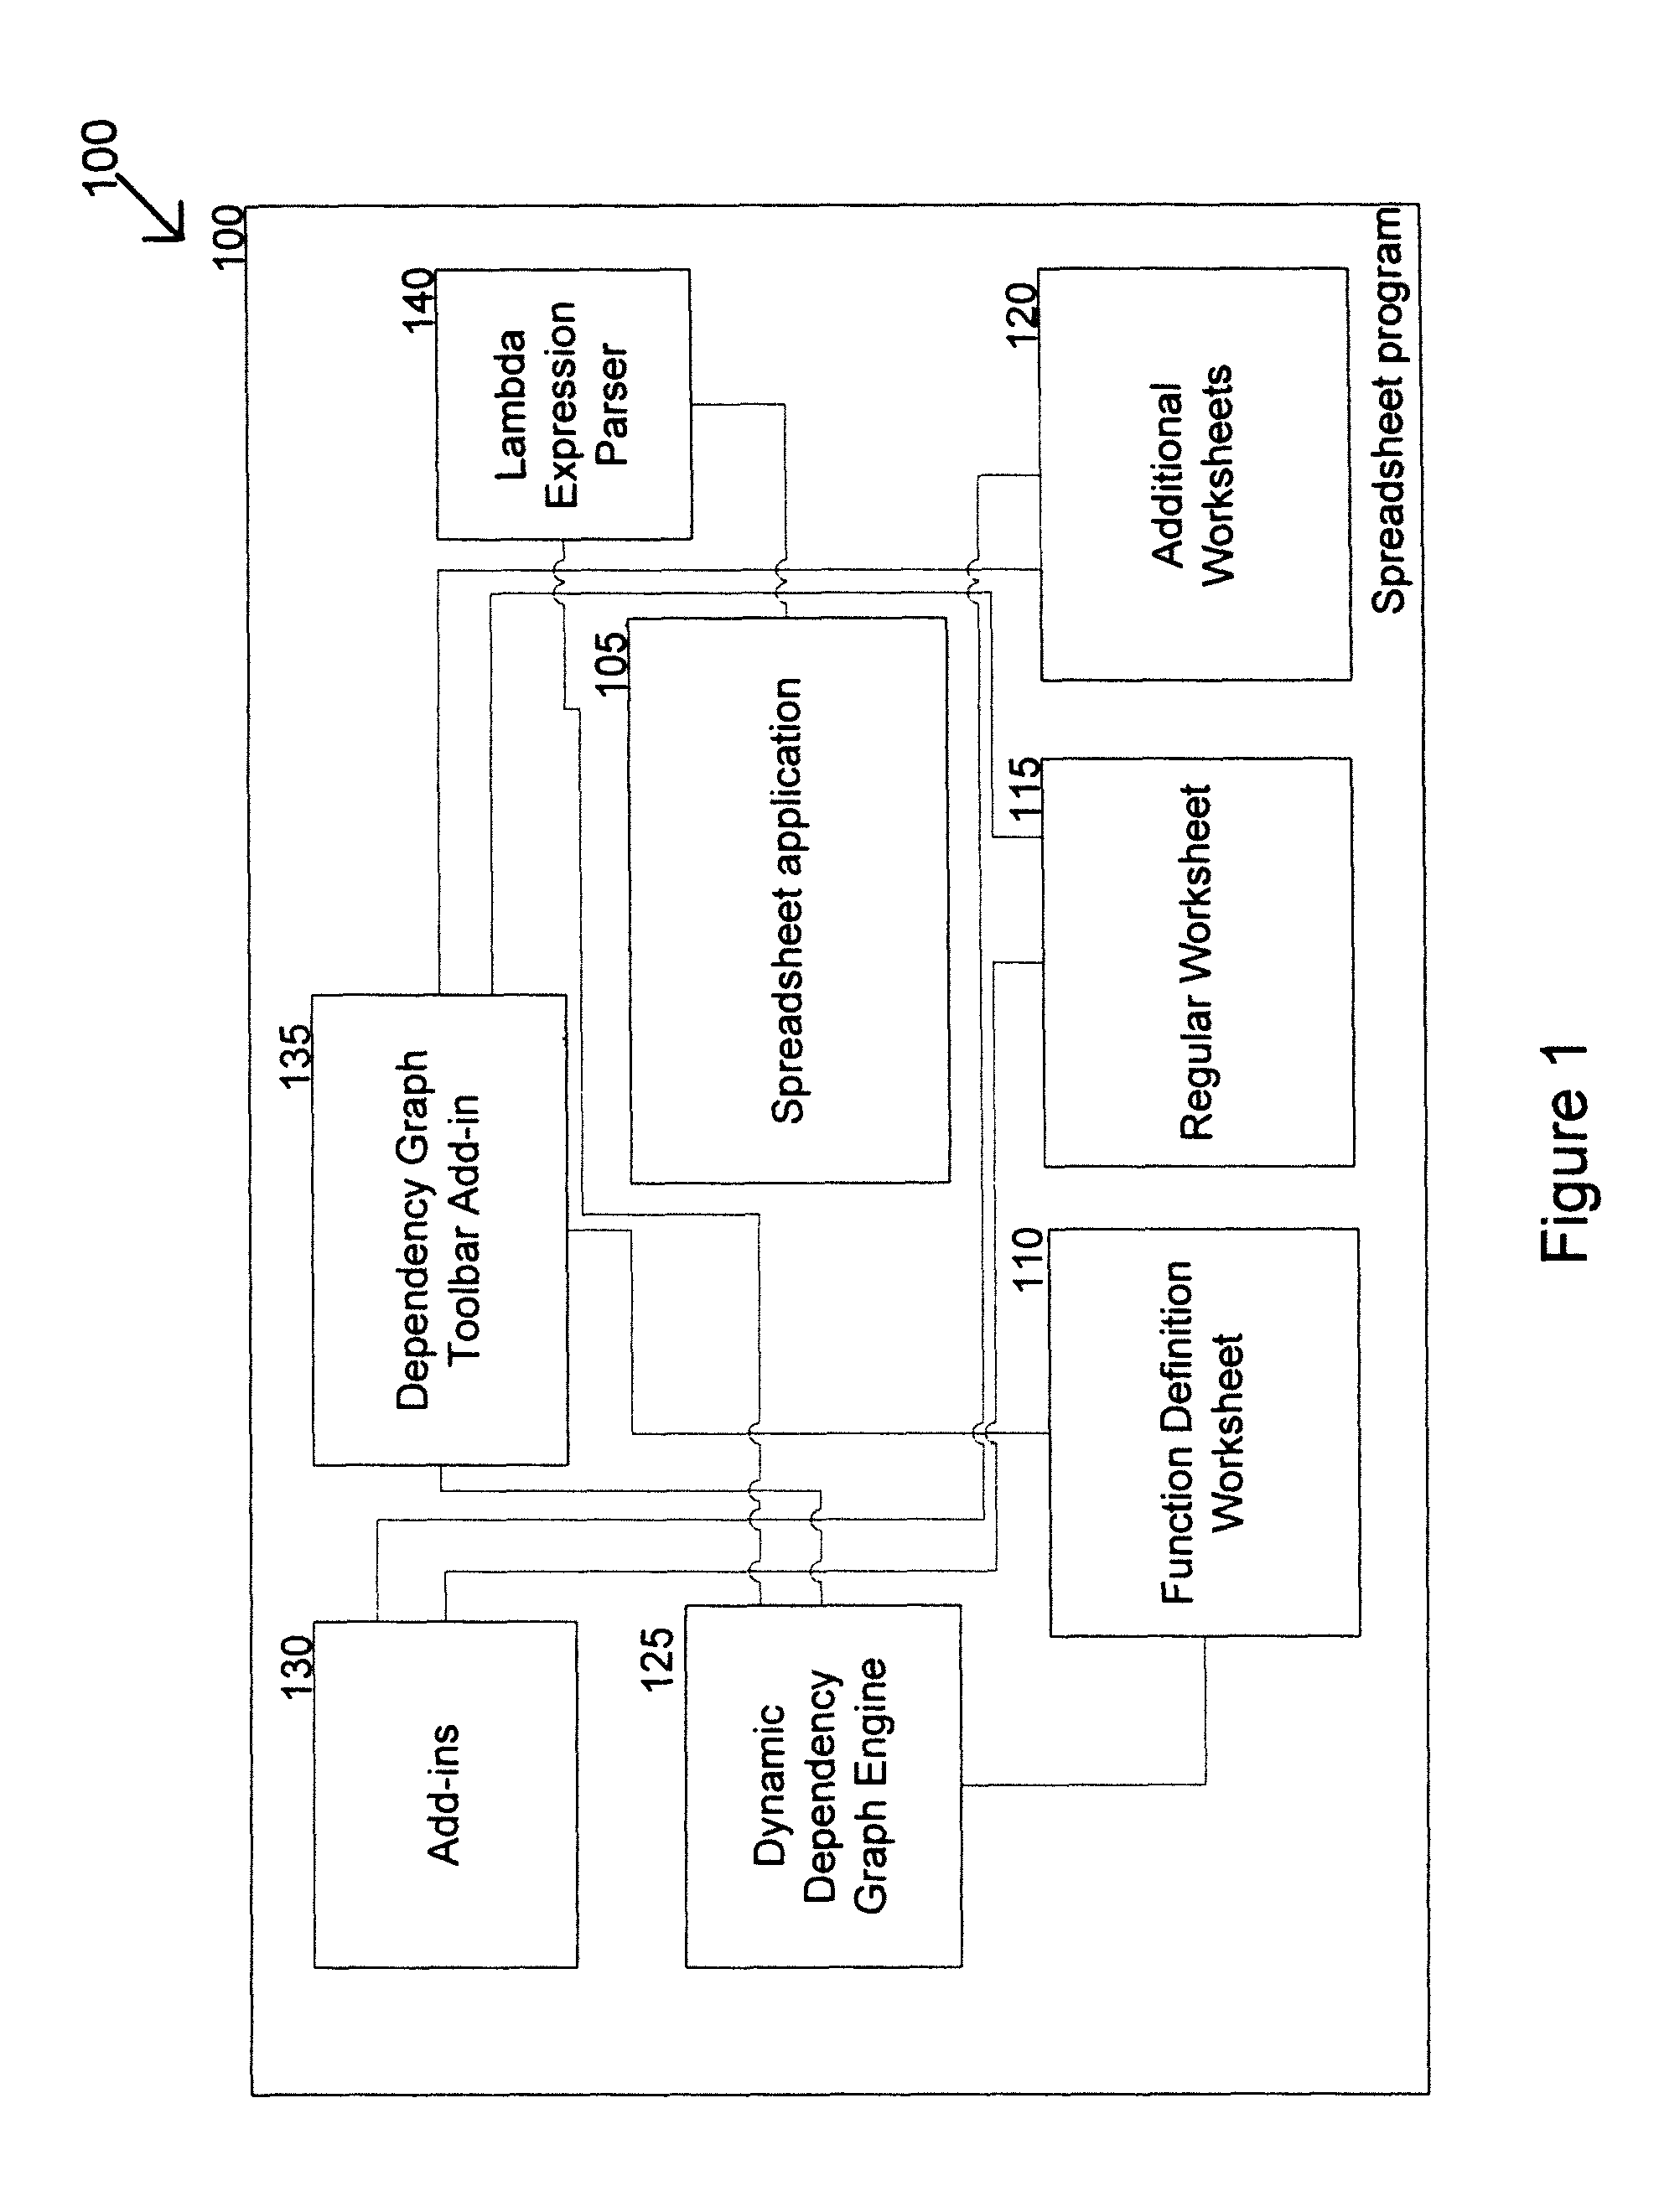 System and method for storing a series of calculations as a function for implementation in a spreadsheet application